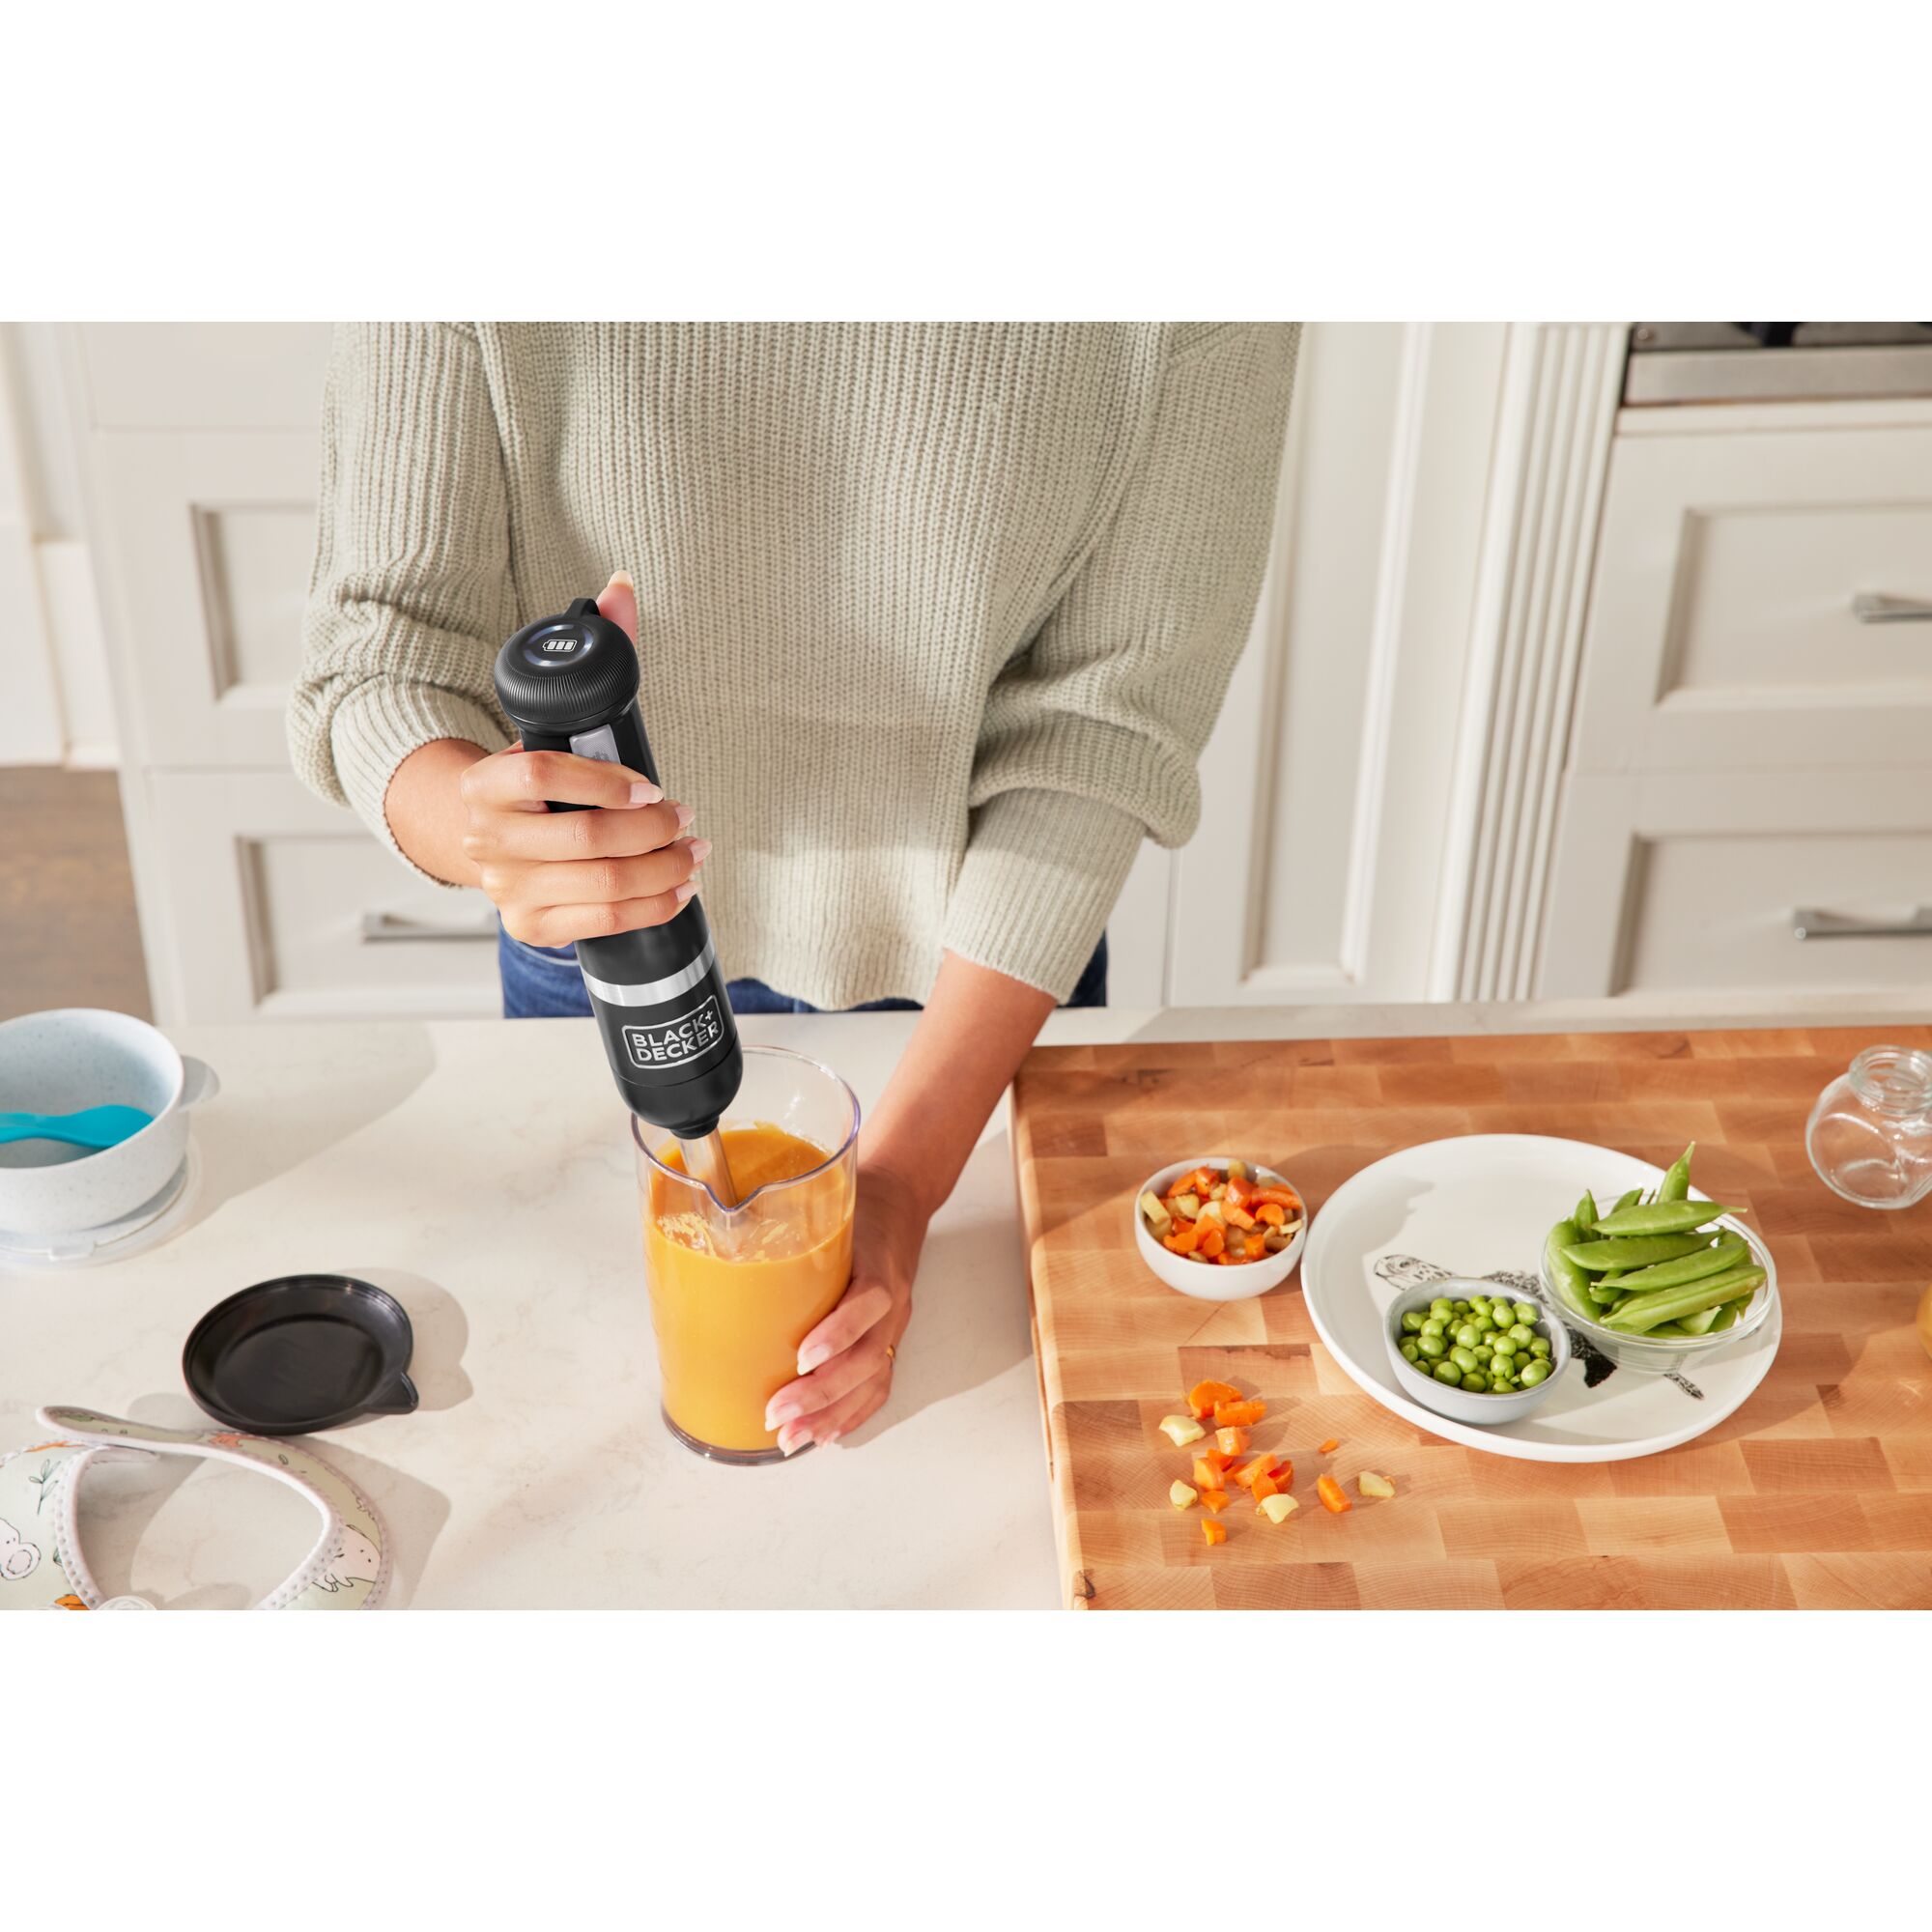 Talent using the black, BLACK+DECKER kitchen wand immersion blender to prepare baby food